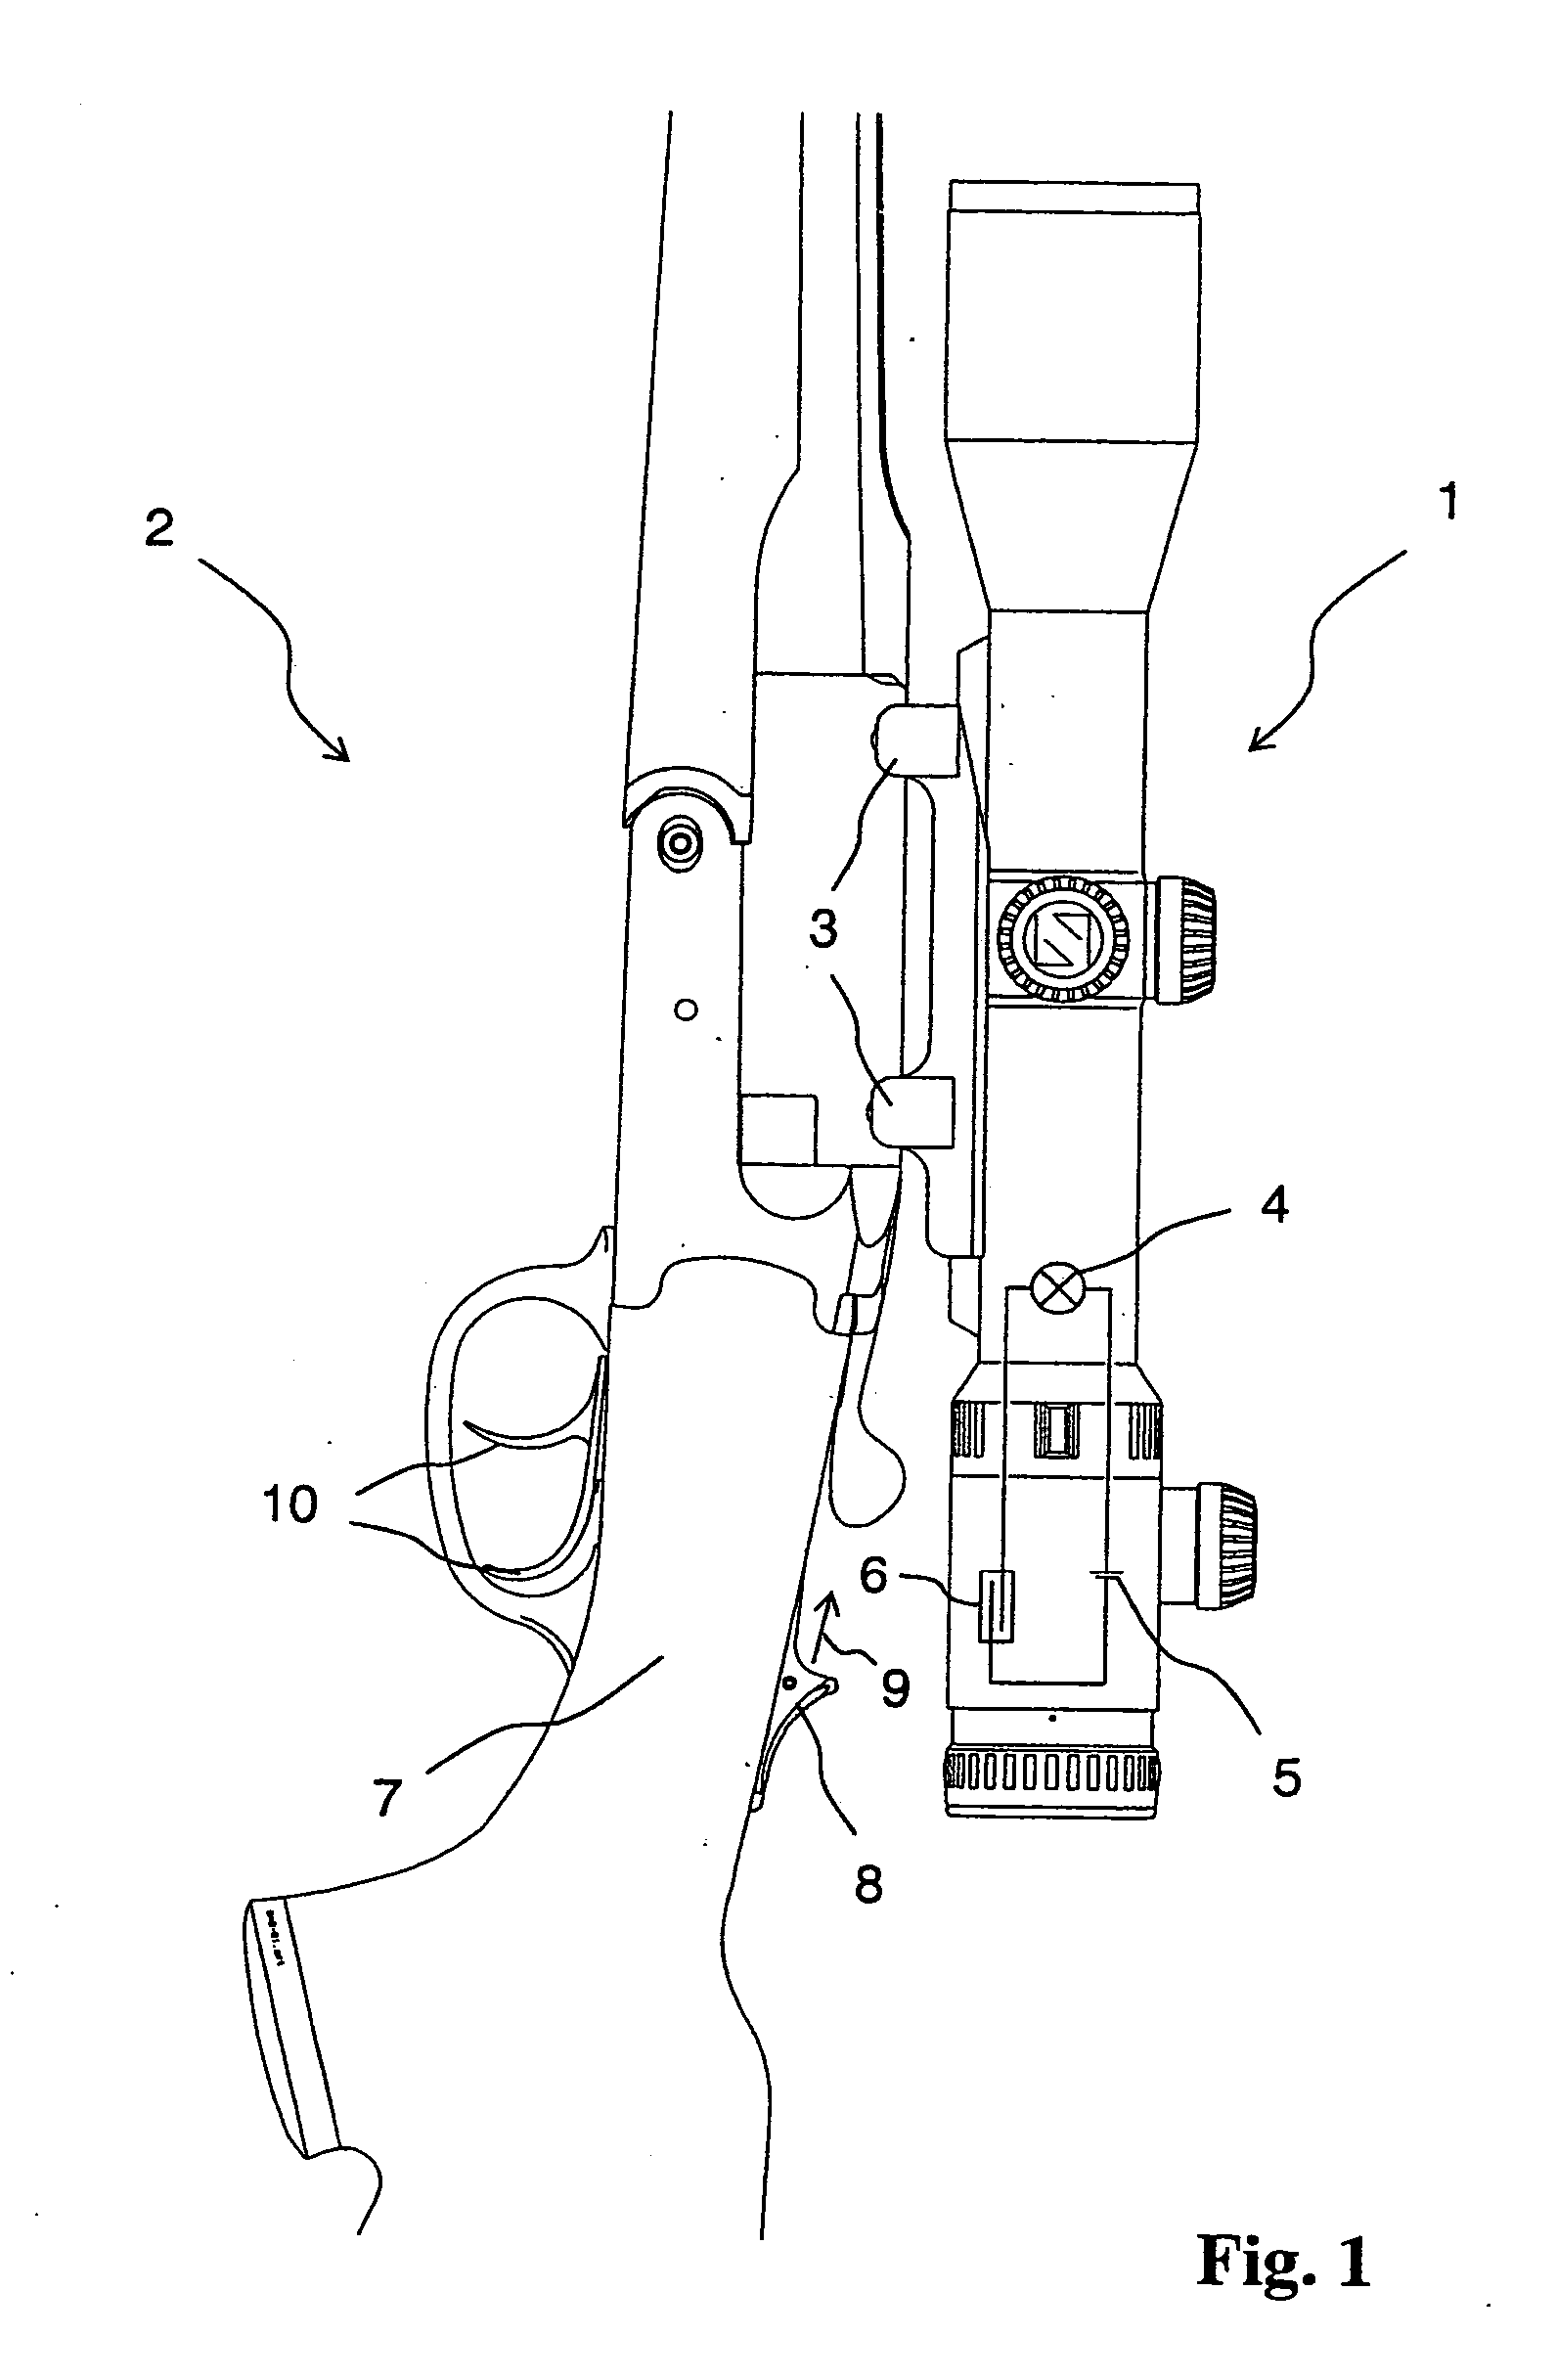 Sighting device for a firearm